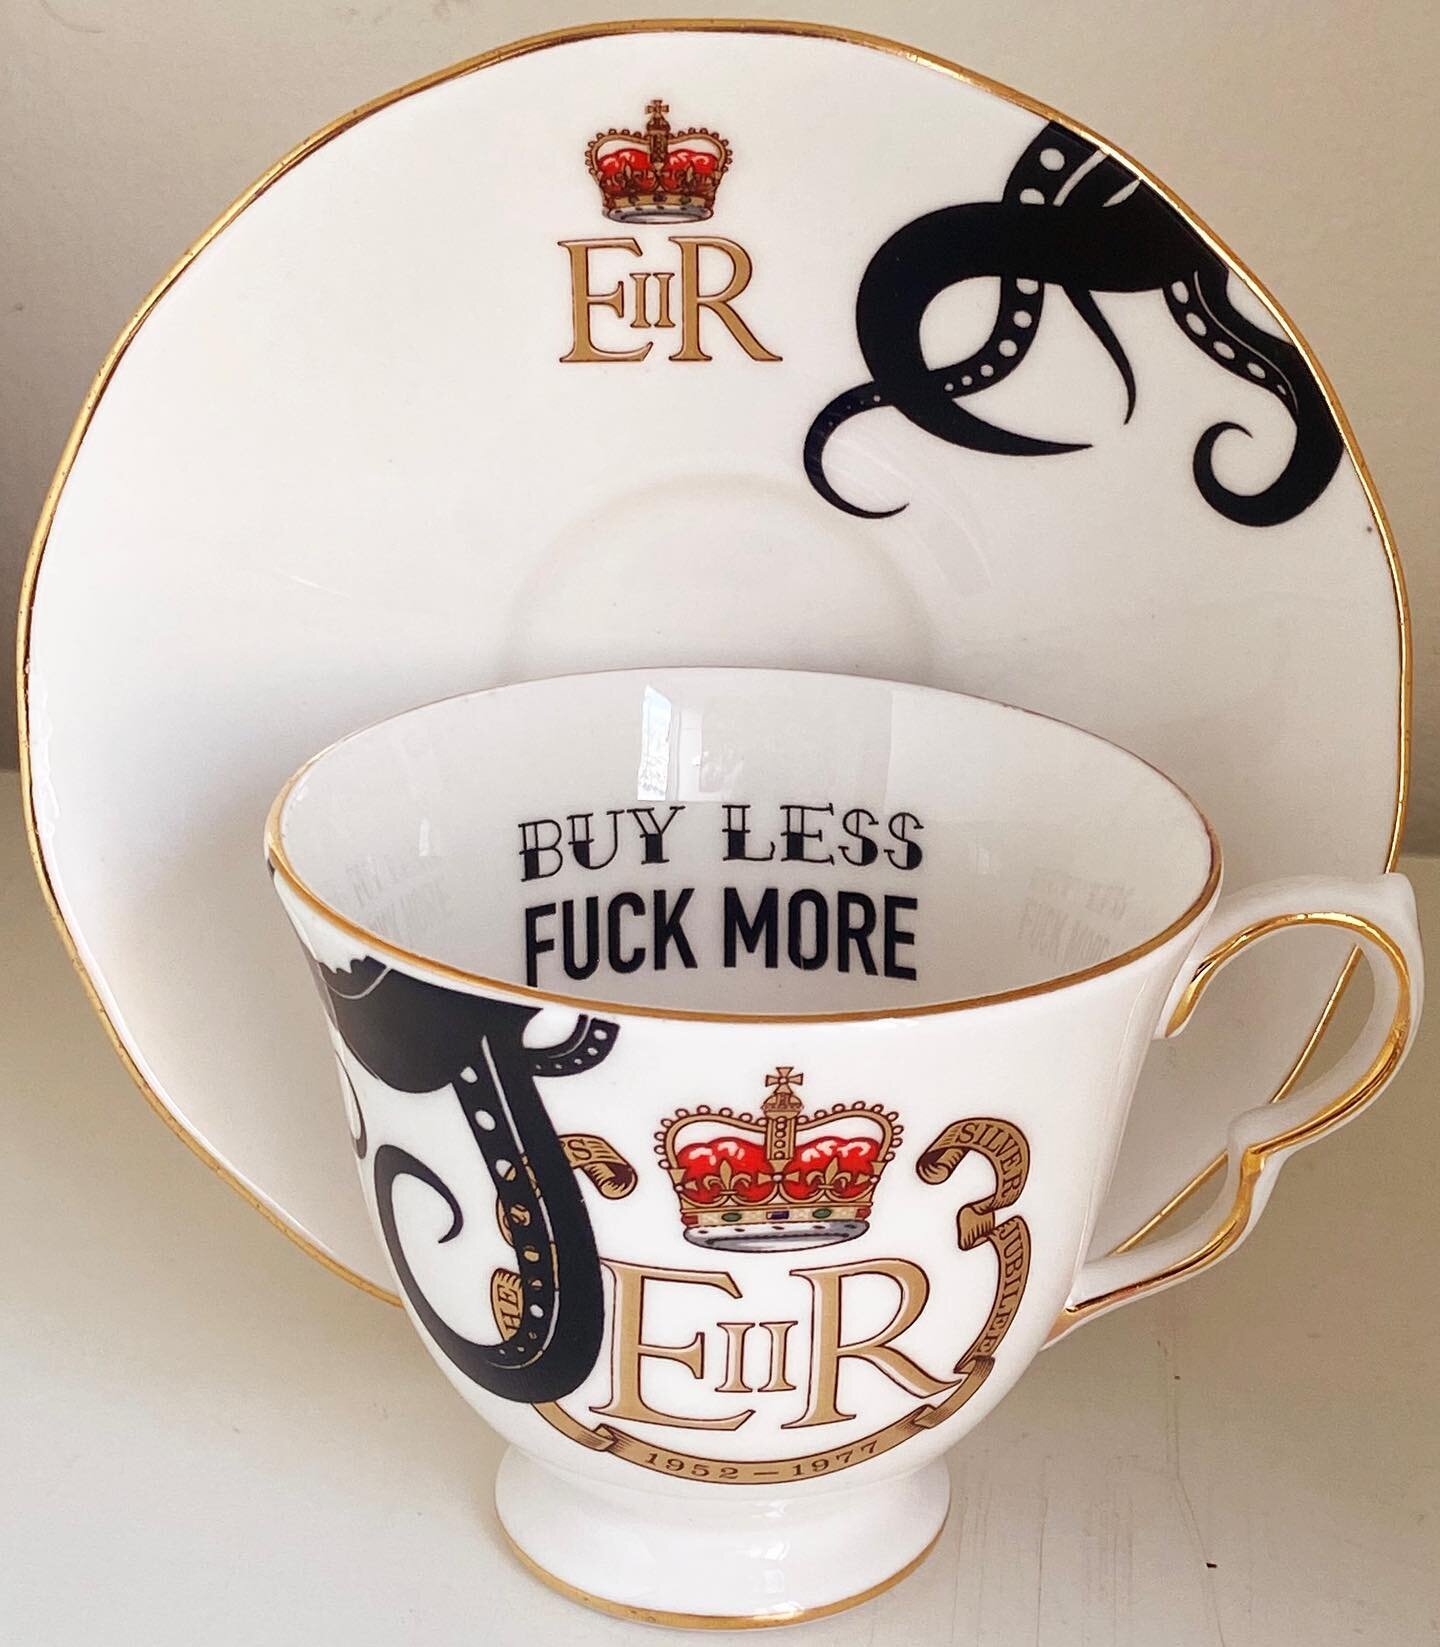 &lsquo;Buy less, Fuck More&rsquo; - I couldn&rsquo;t resist making a special little #jubilee set of tea cups and saucers. I have #upcycled 5 gorgeous Queen Anne bone china tea cups that celebrate #queenelizabeth silver jubilee in #1977. They are in g